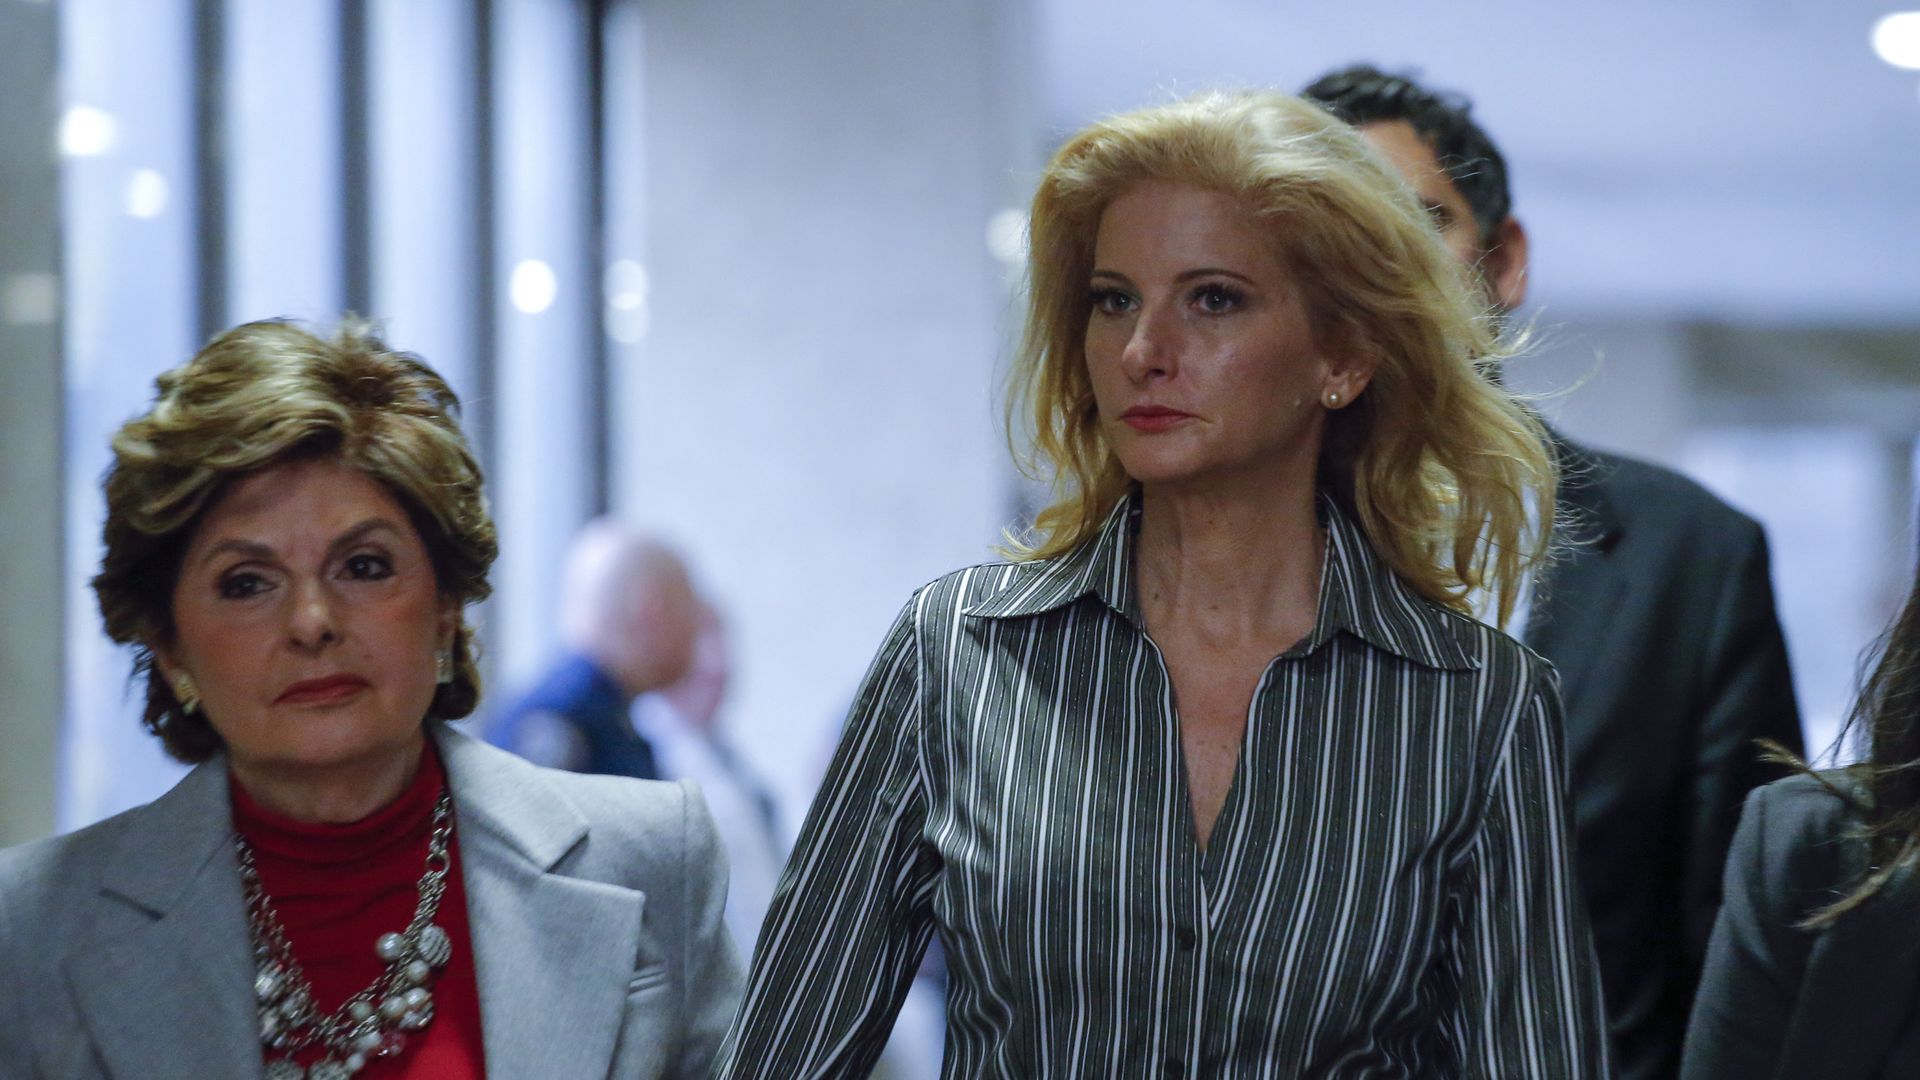   Summer Zervos, (R) a former contestant on "The Apprentice" arrives with lawyer Gloria Allred at the New York County Criminal Court on December 5, 2017, in New York. 